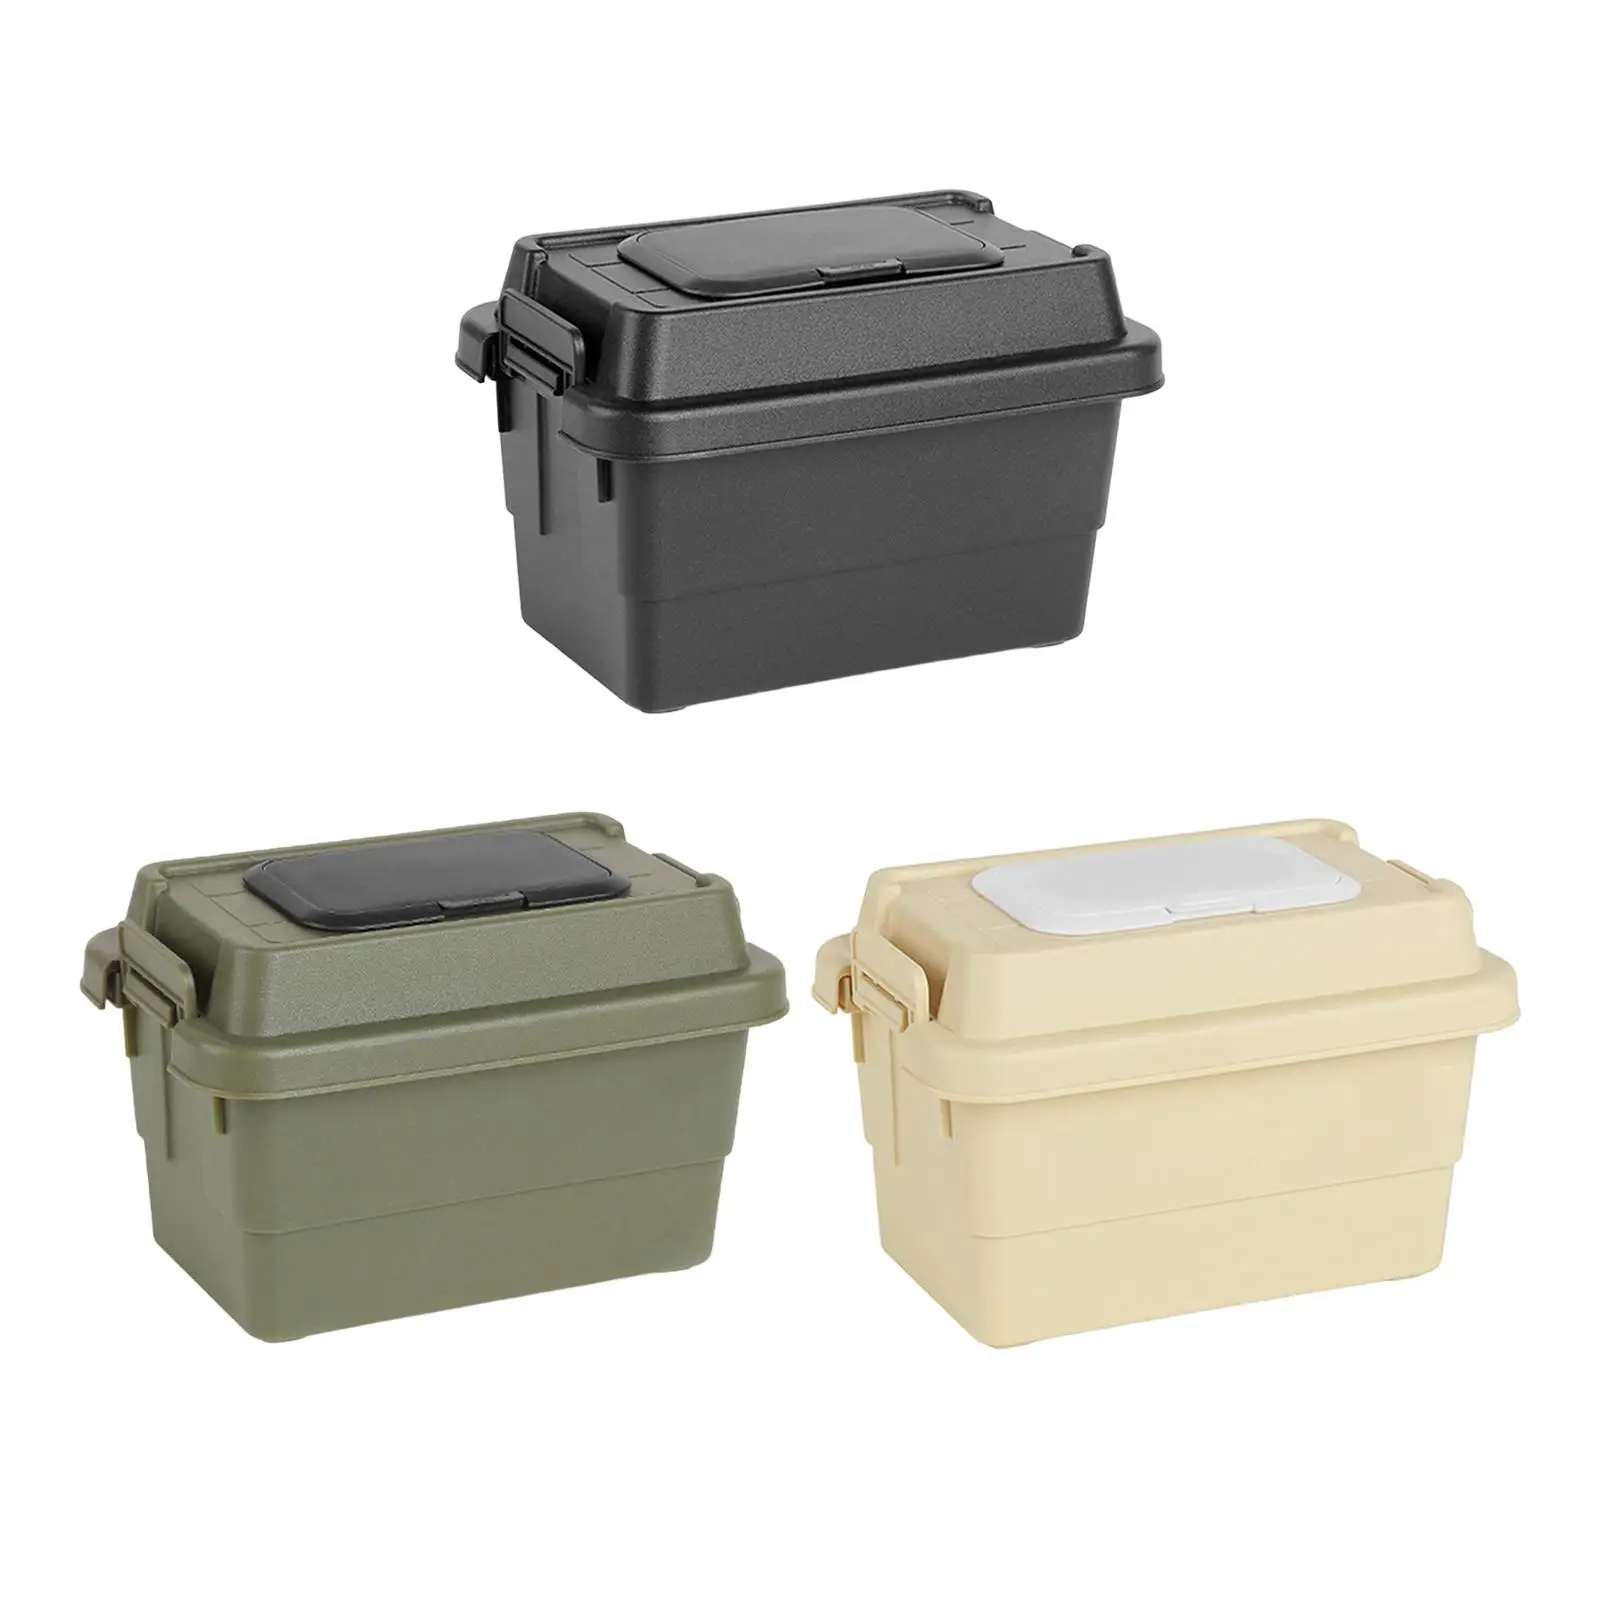 Outdoor Storage Box Nonslip Base with Cover Thicken Multi Functional Storage Case for Cooking Backpacking Traveling Home